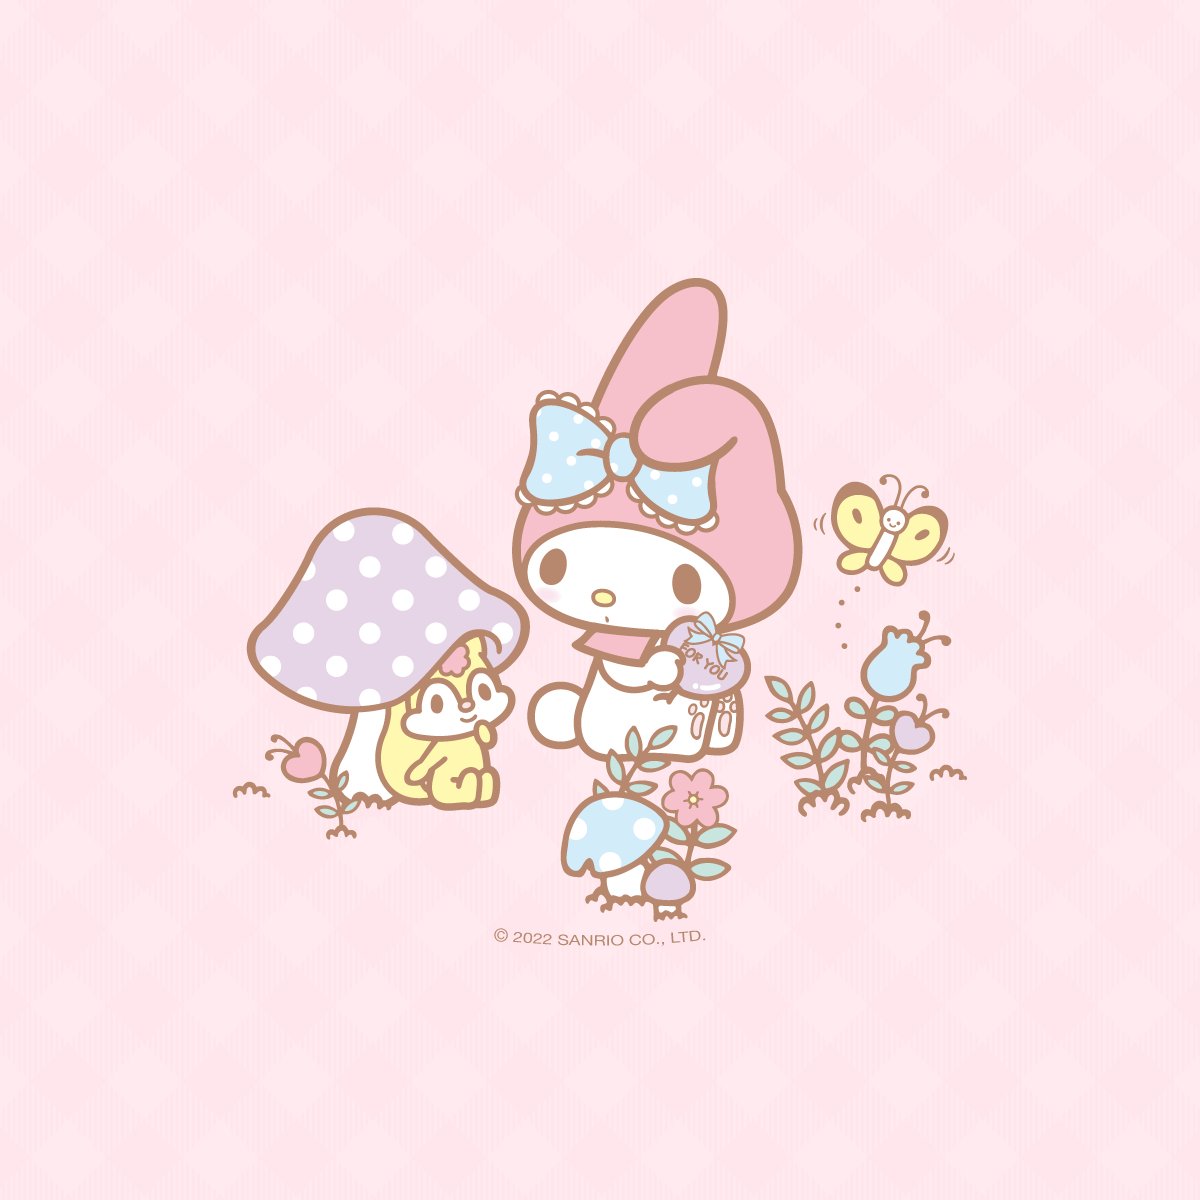 My Melody Phone my melody iphone HD phone wallpaper  Pxfuel